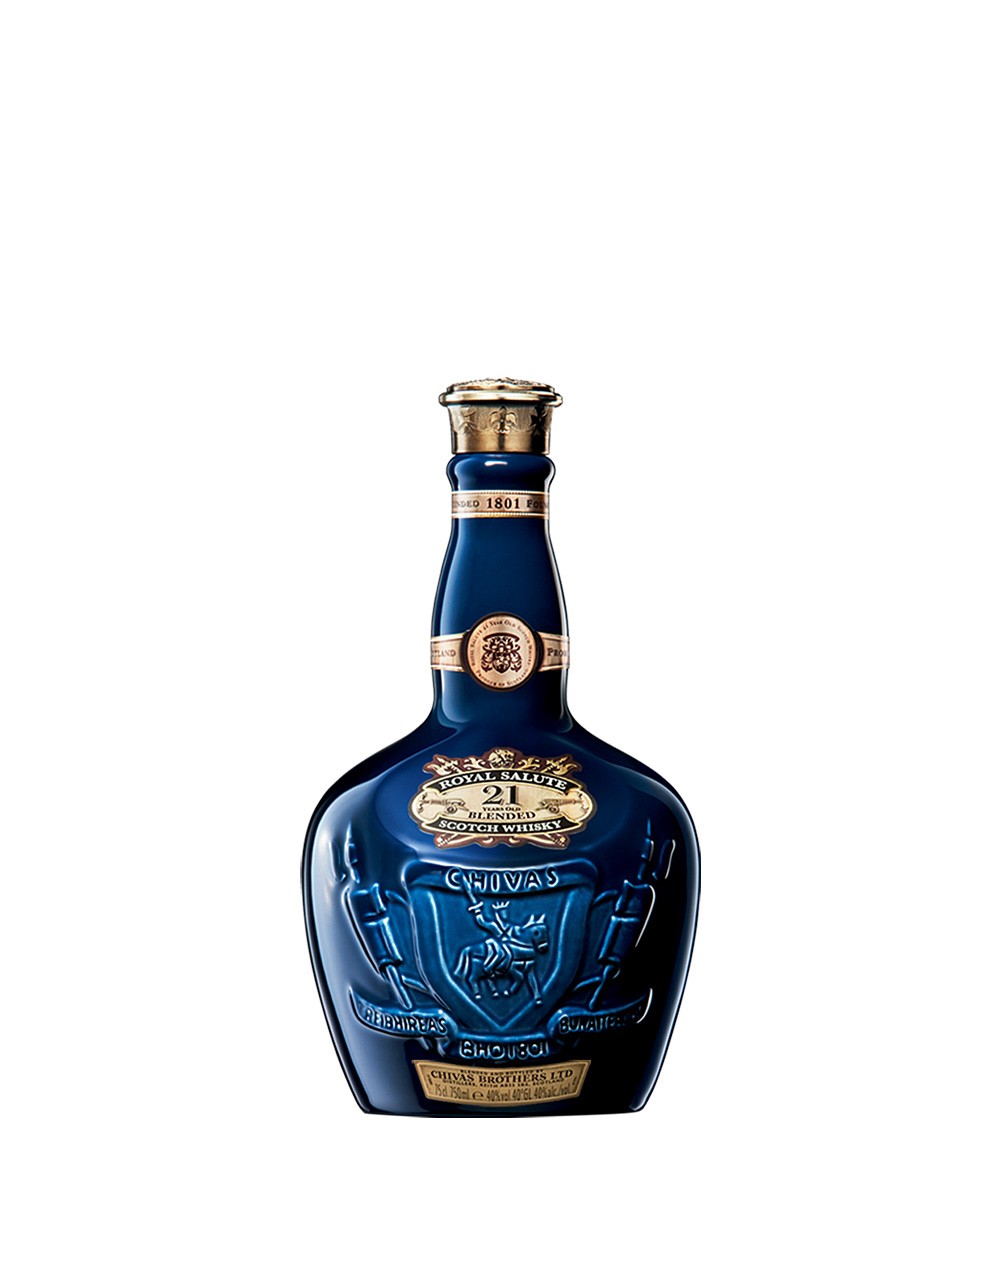 royal salute 21 price in india